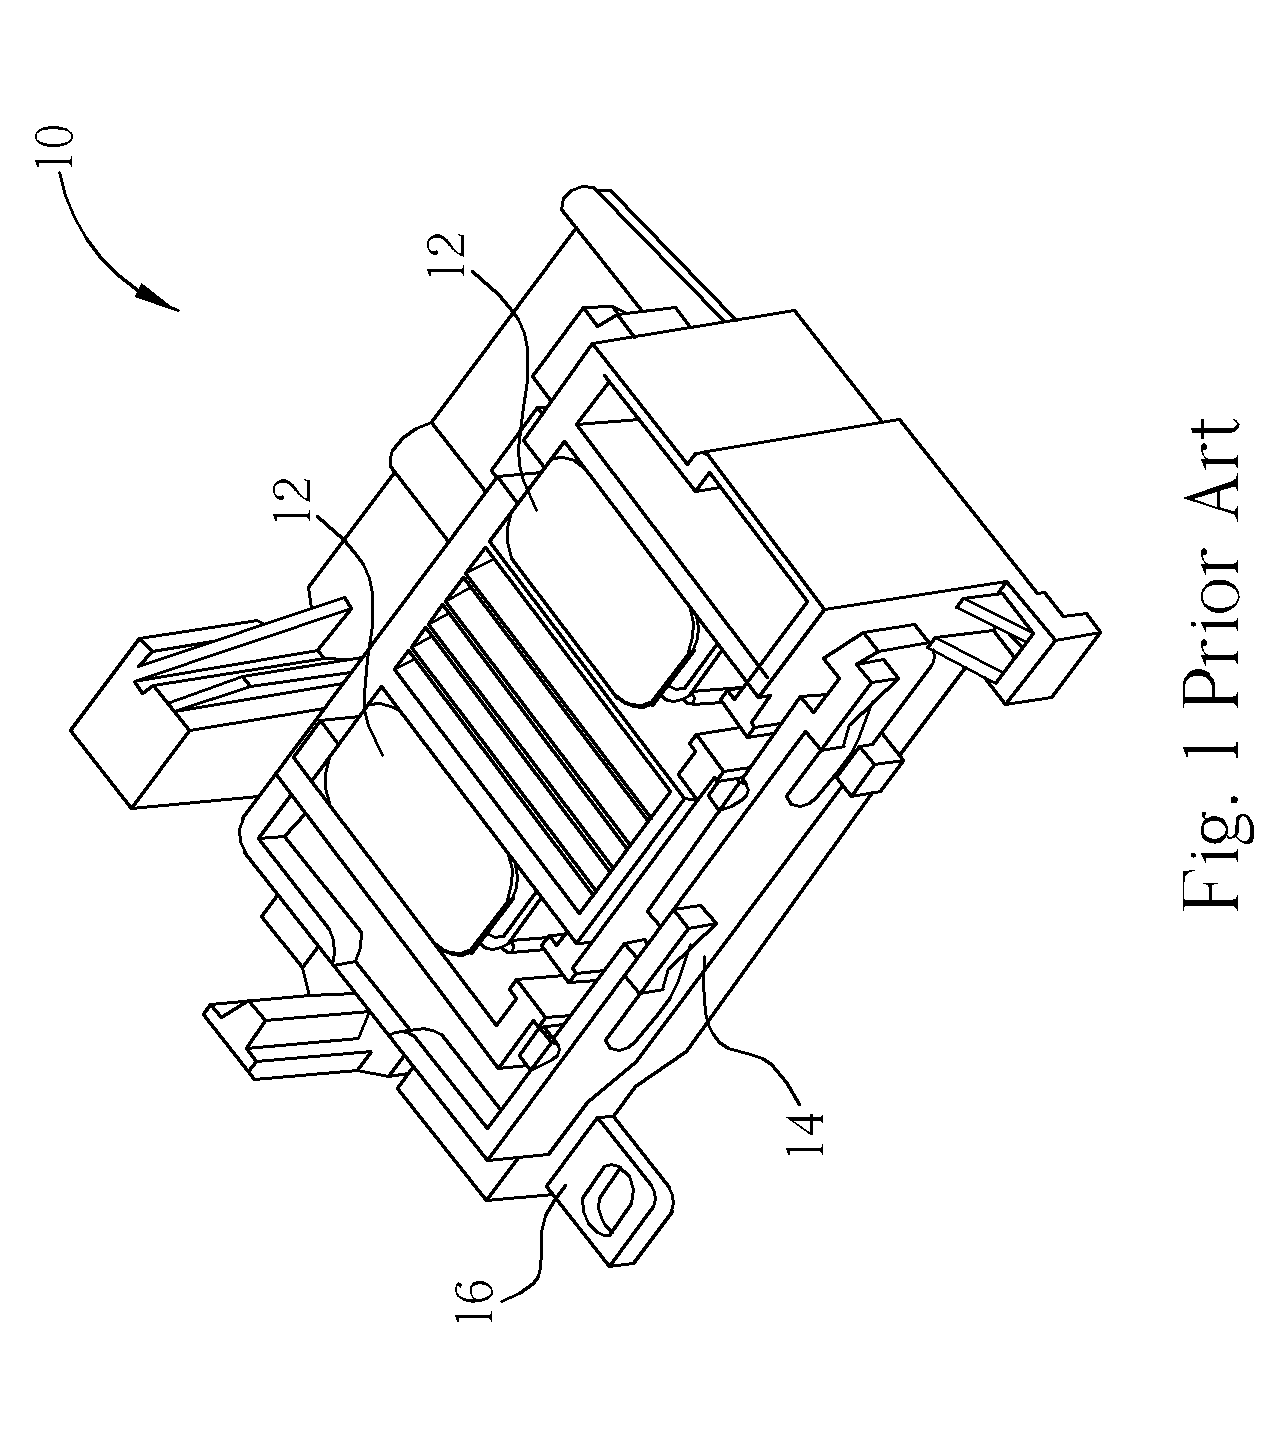 Capping device for capping a print head